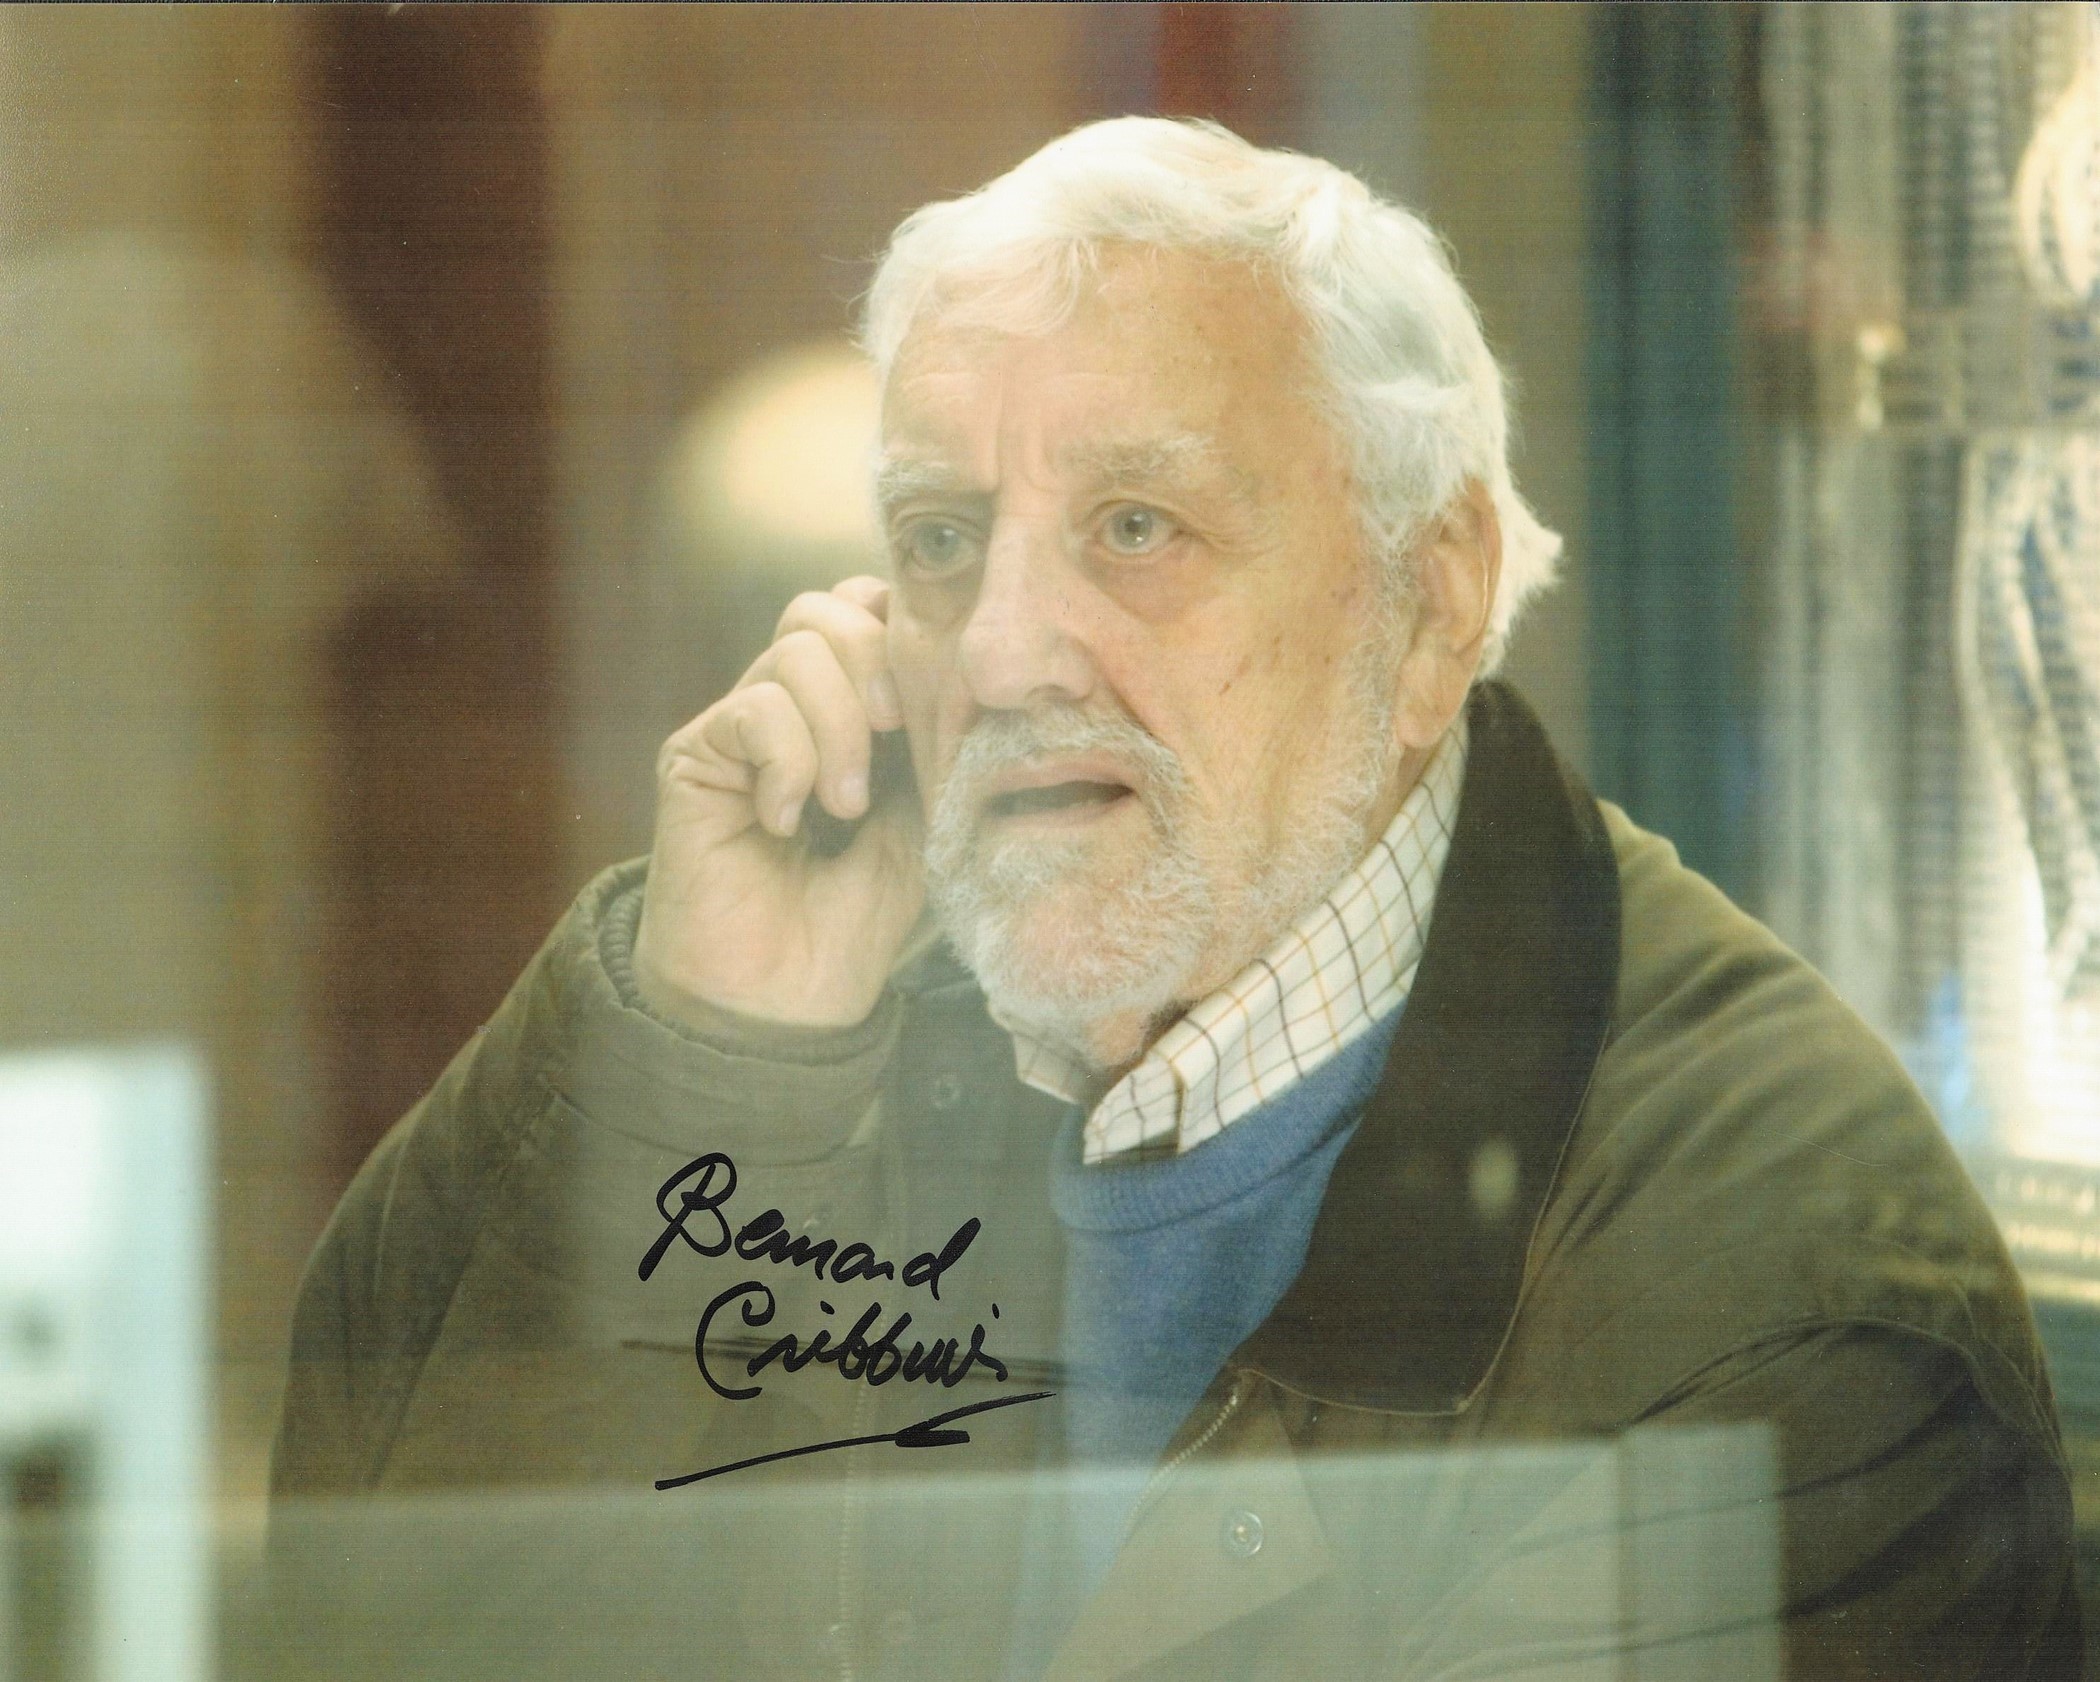 Bernard Cribbins Doctor Who 10x8 Signed coloured photo. Good condition. All autographs come with a